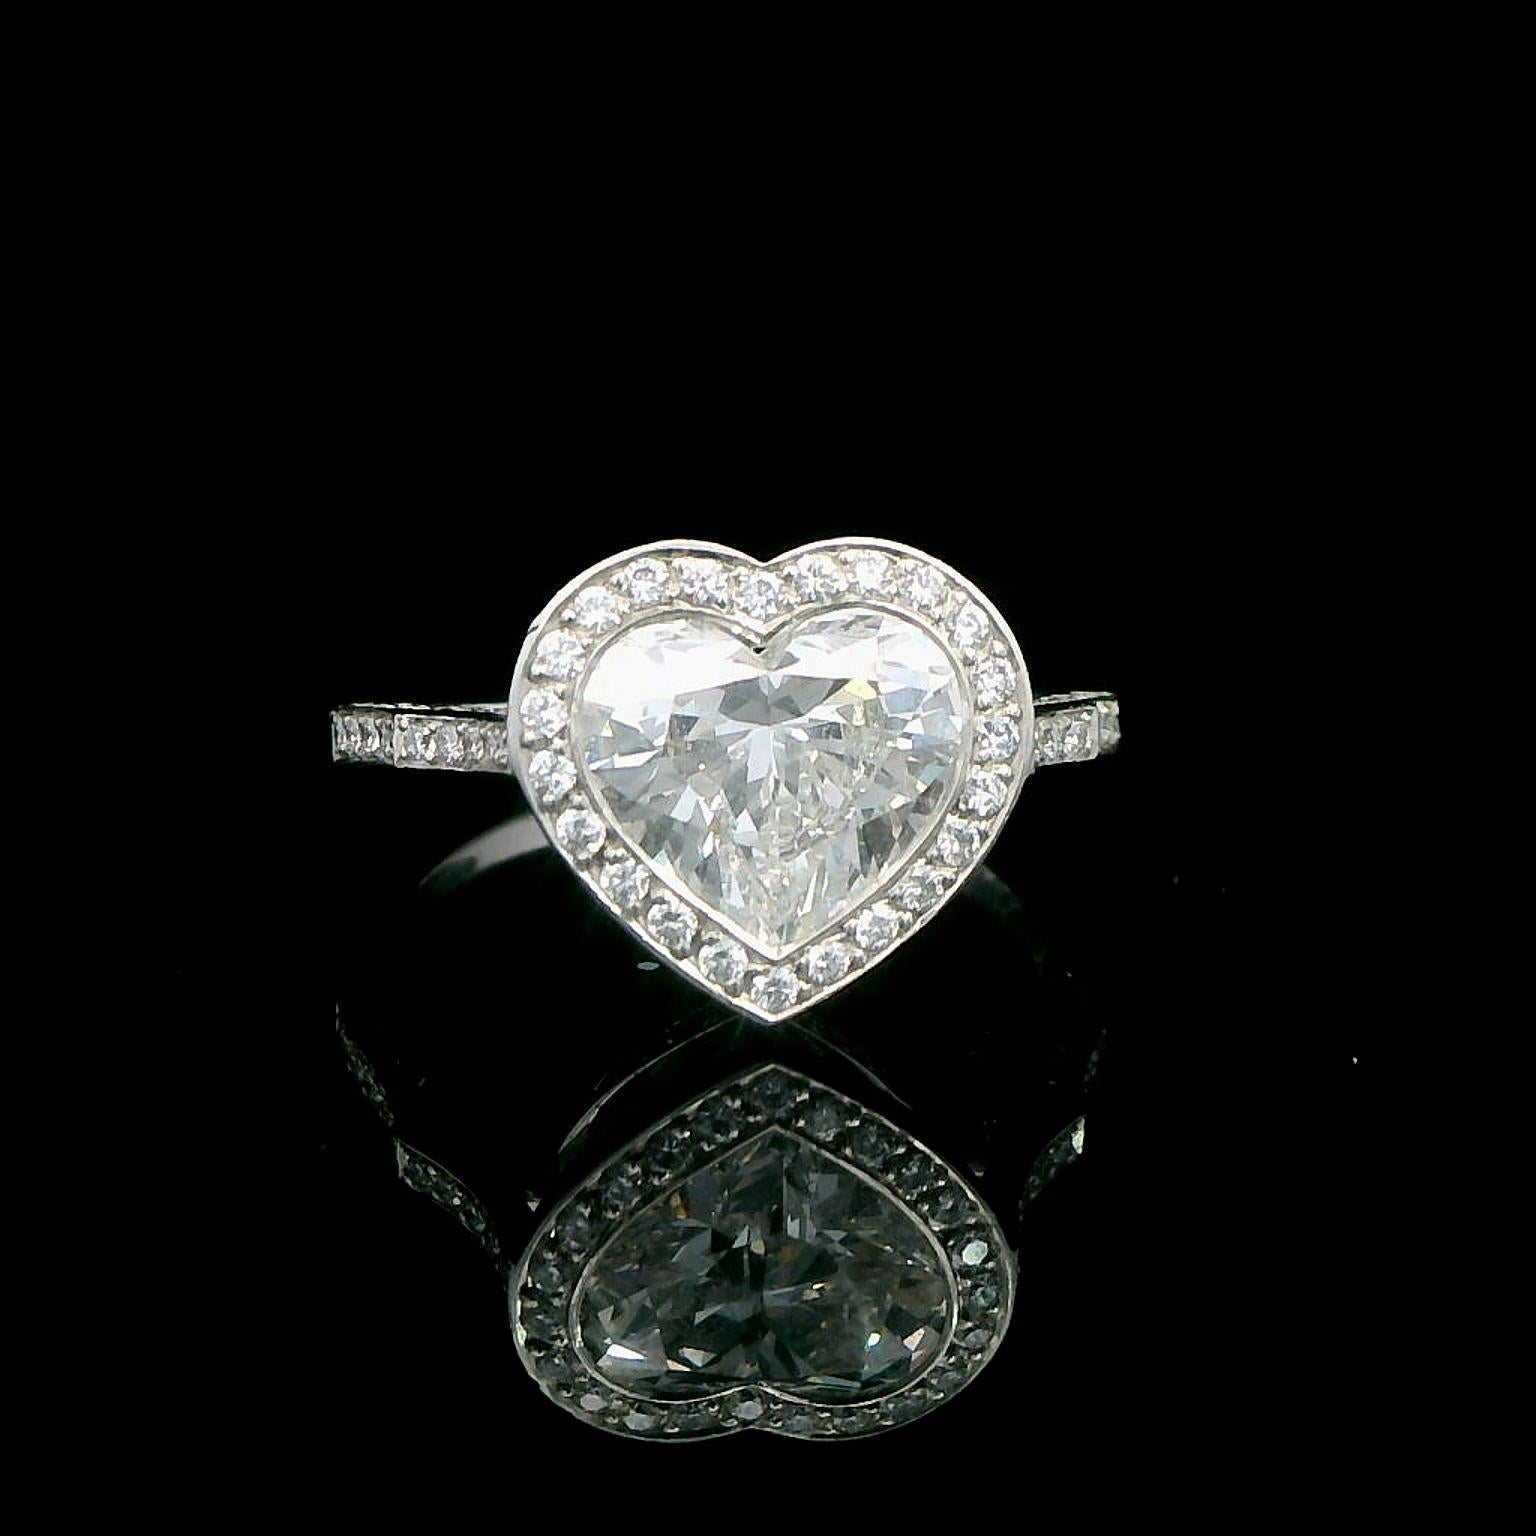 GIA Certified 1.63 Carat Heart Shaped Diamond 18K Gold Ring For Sale 5